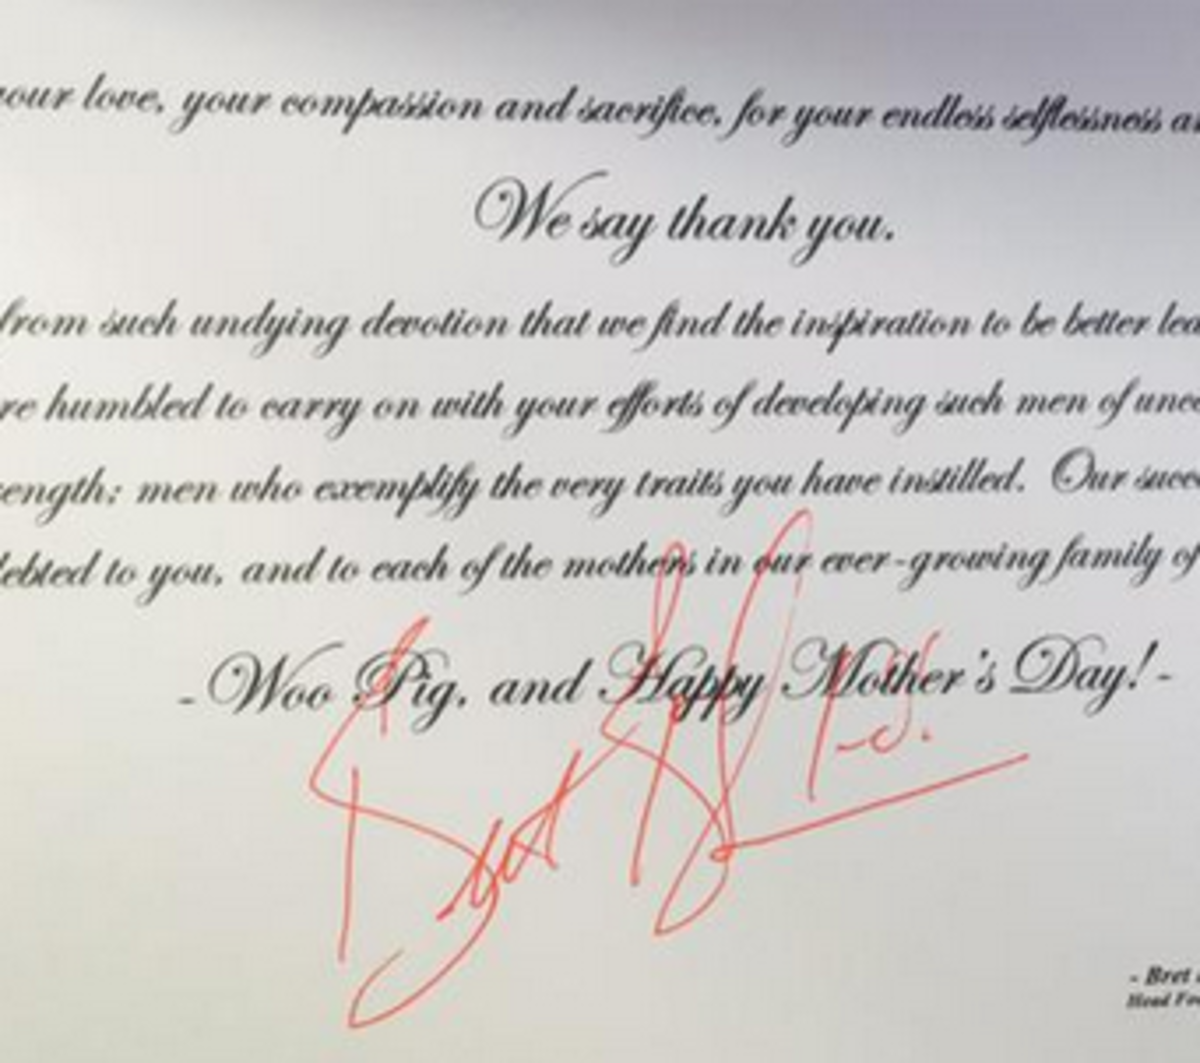 Bret Bielema writes a mothers day card to recruits.